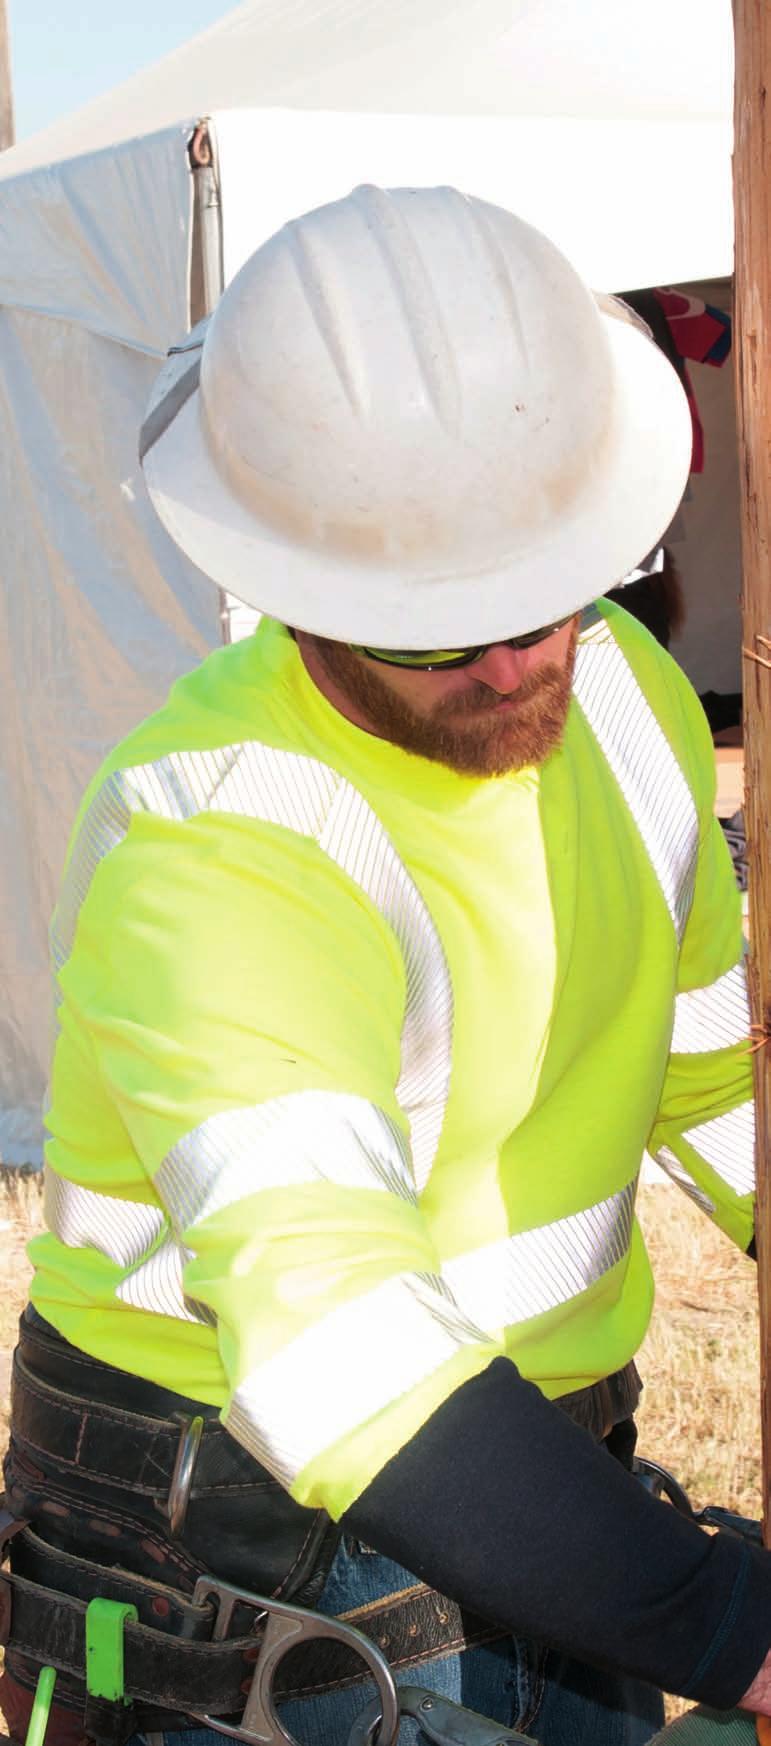 HI-VIS DRI PRO HI-VIS SHIRT / MENS Available Spring 2018 Inherently fire and arc-resistant NEW Tri-fiber fabric that delivers superior, always permanent moisture management 3M segmented silver